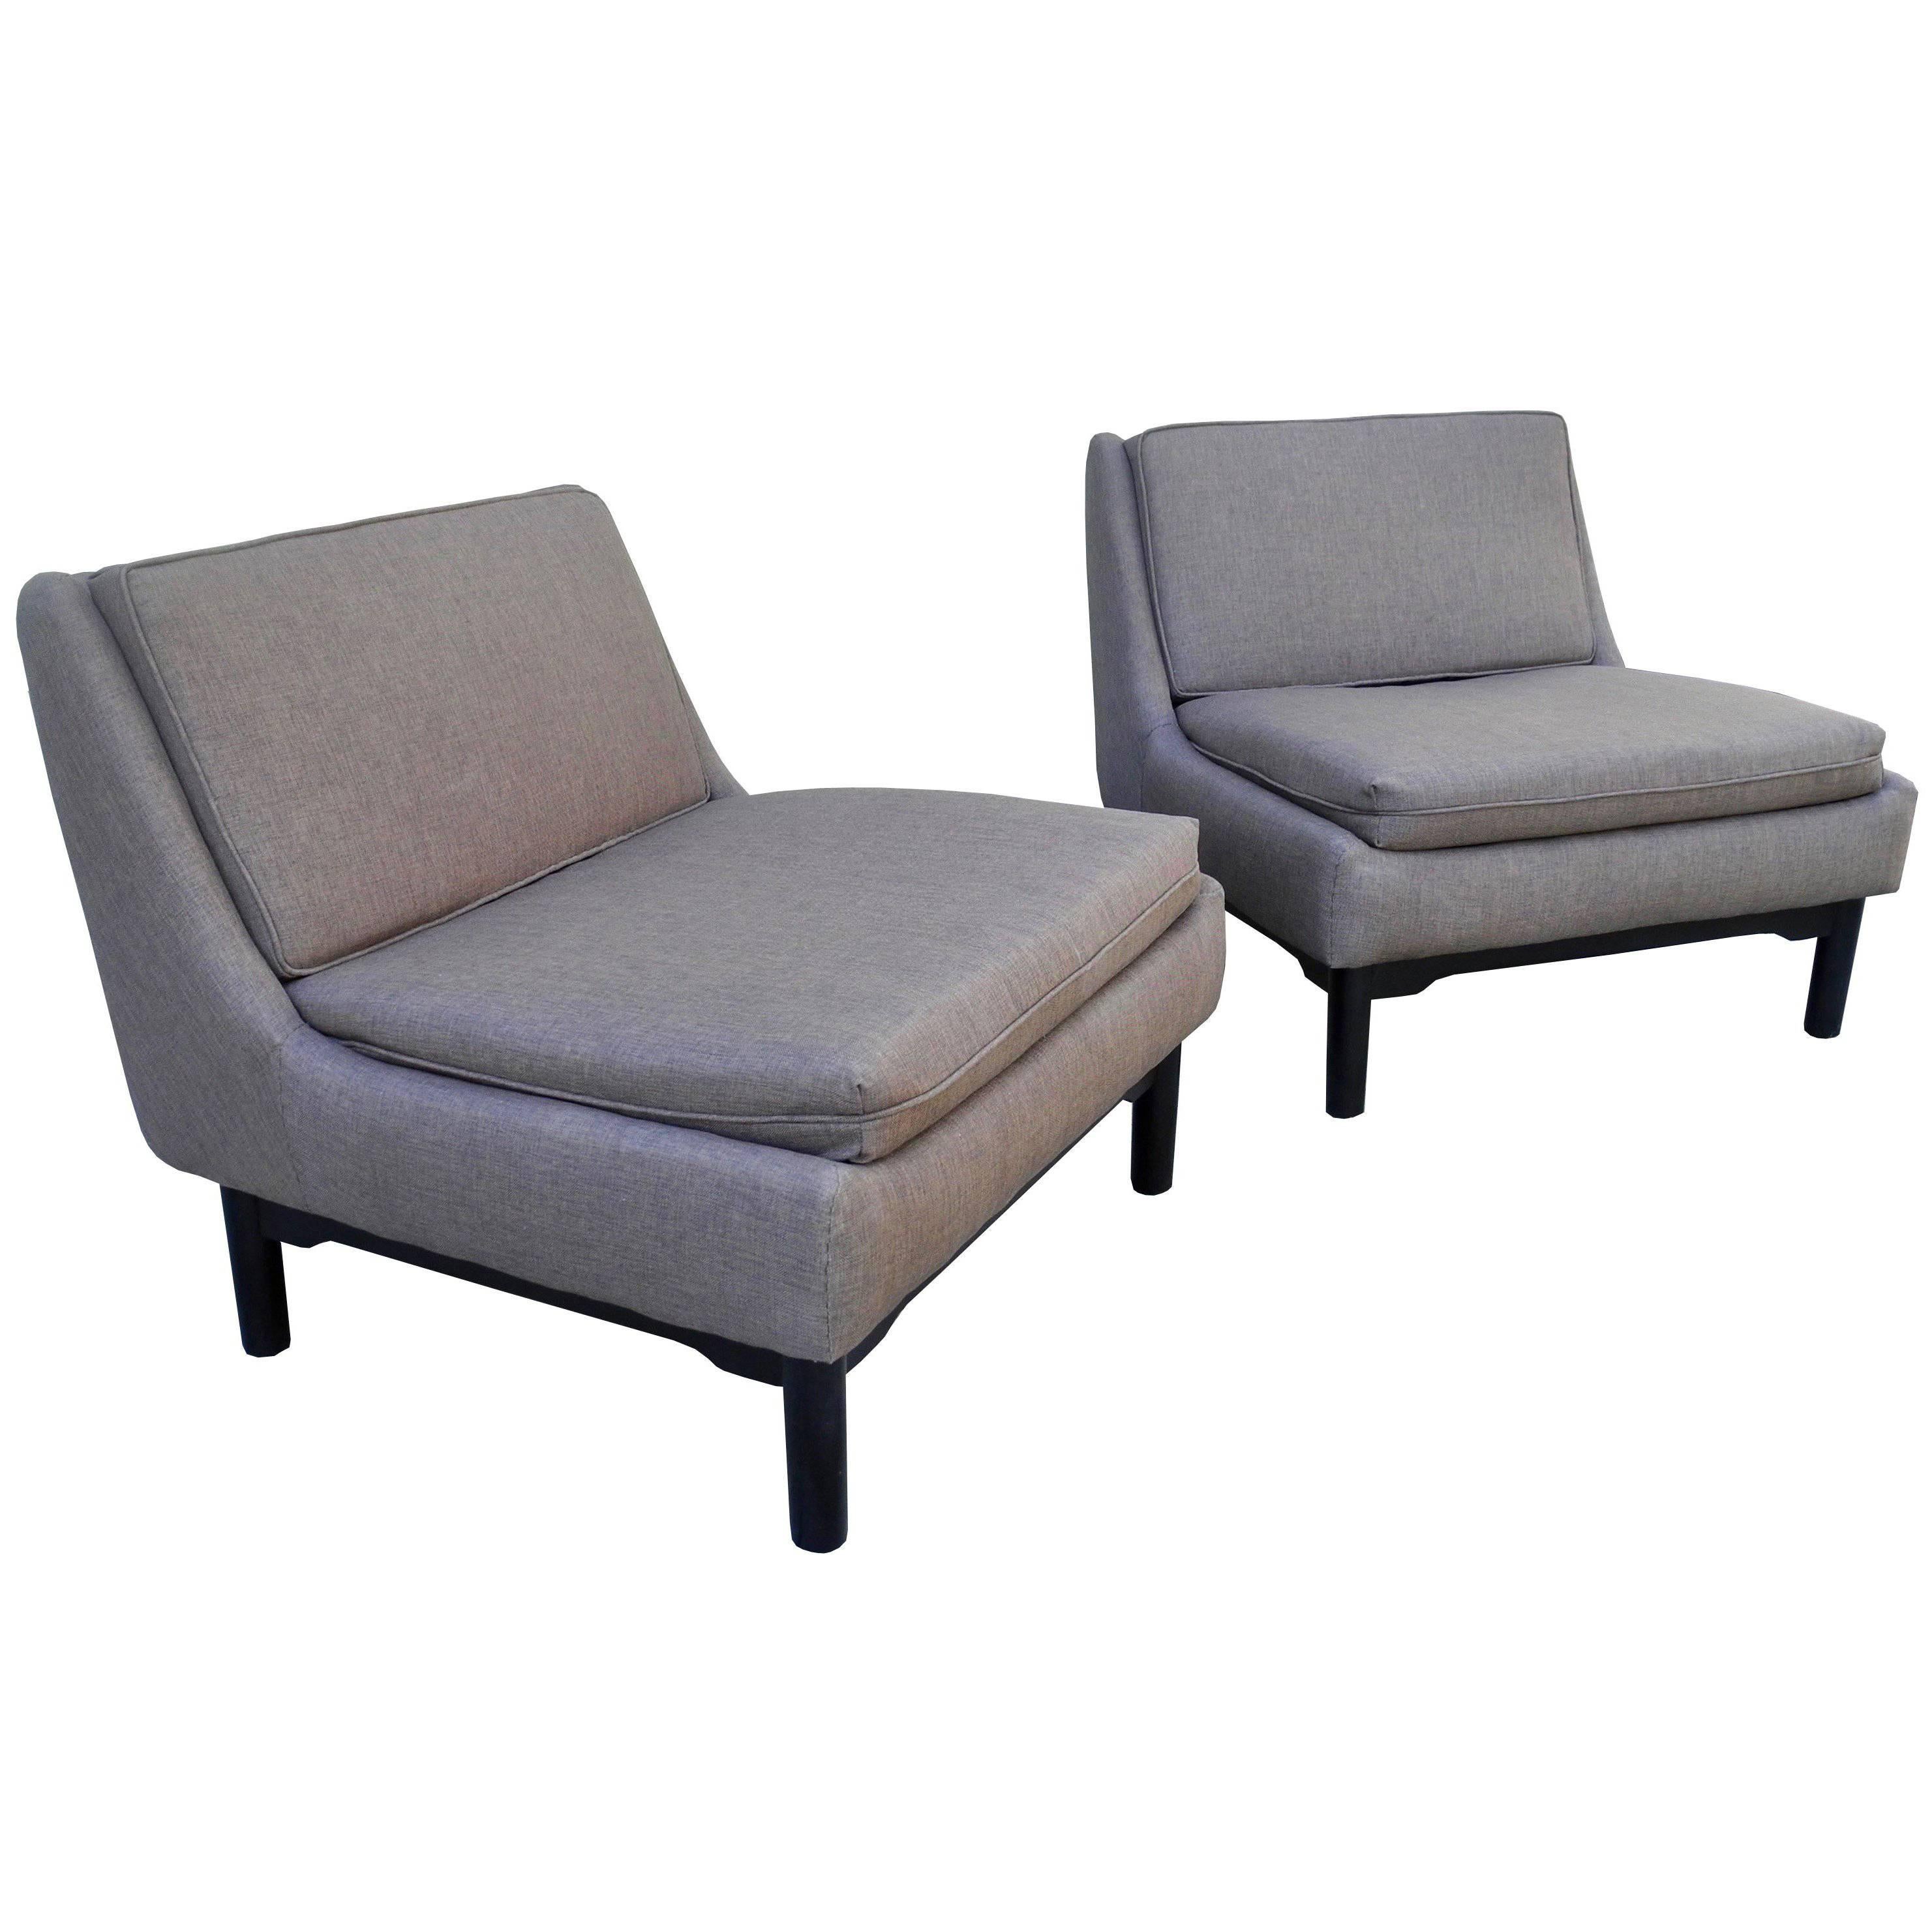 Pair of Mid-Century Modern Upholstered Linen Slipper Chairs by Widdicomb For Sale